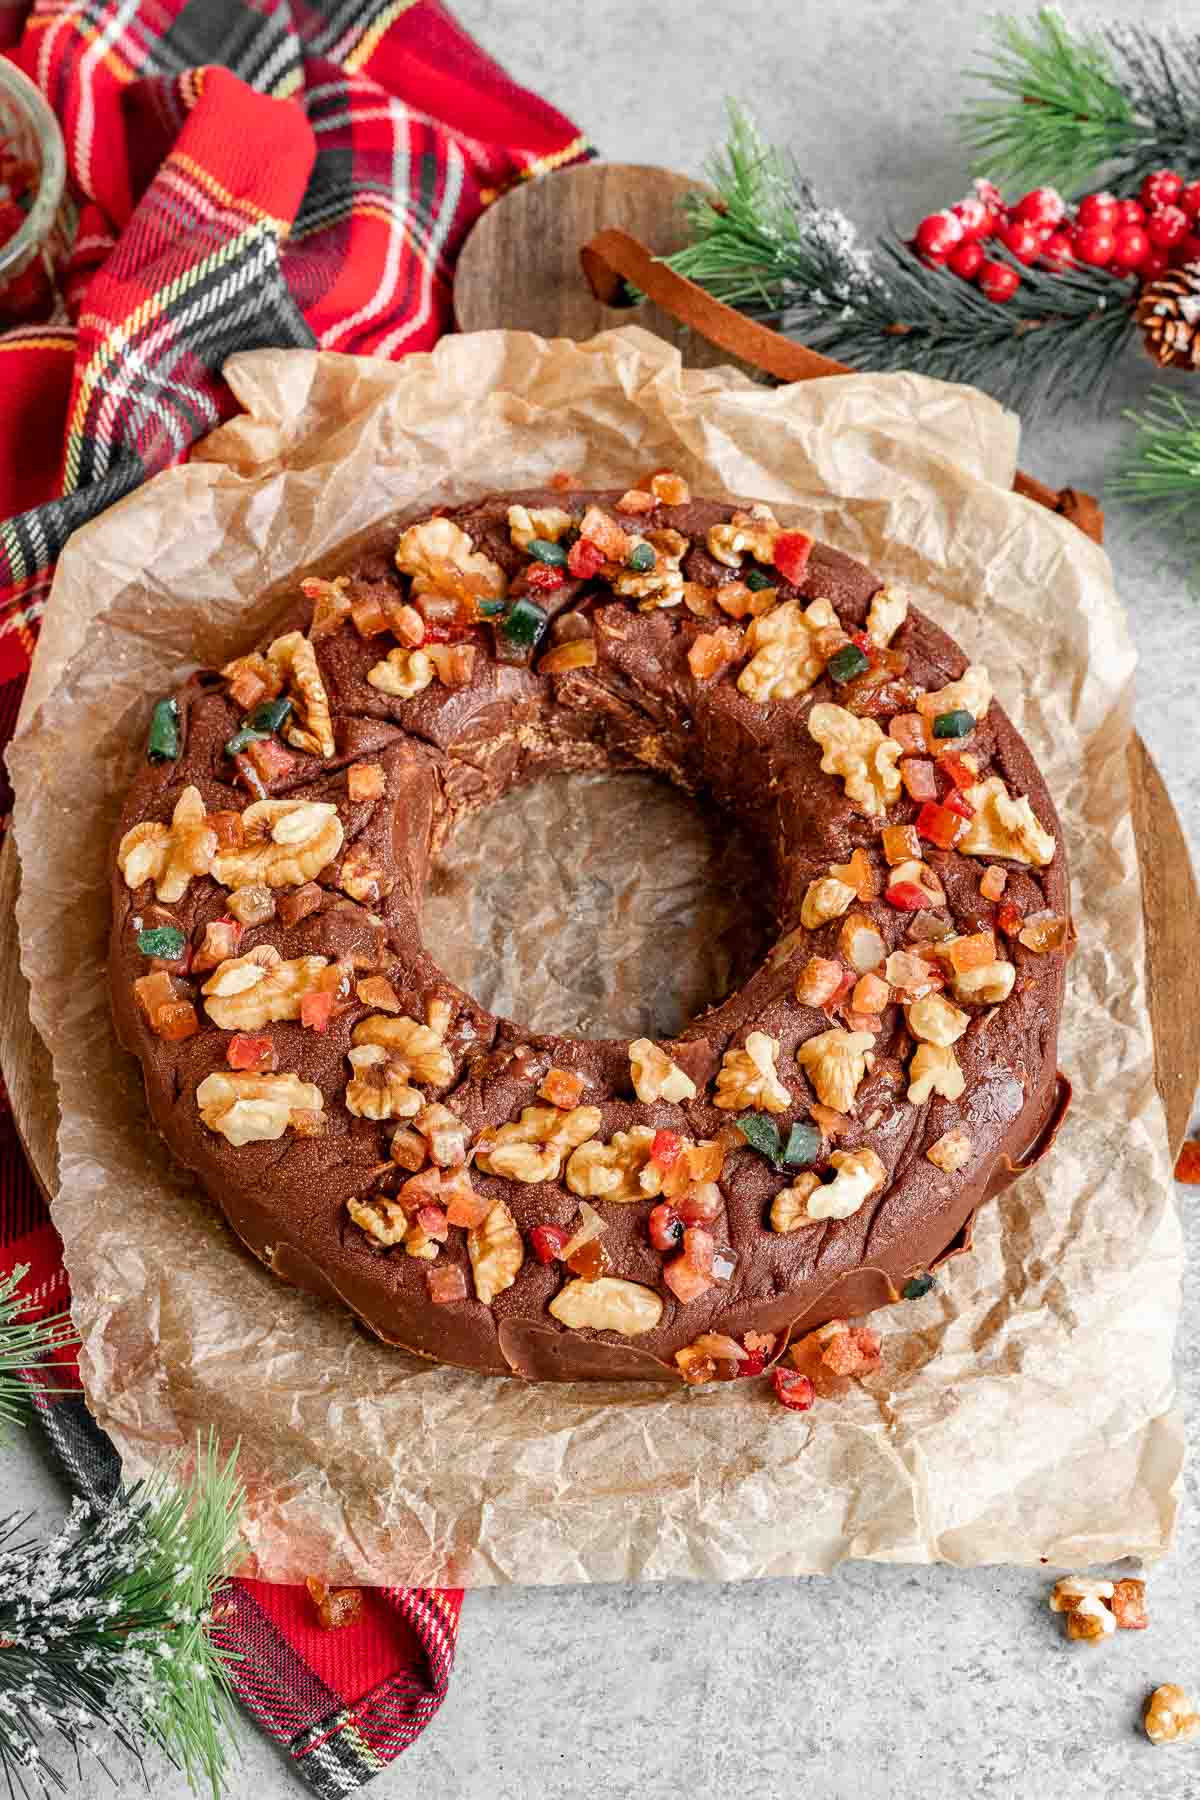 Easy Fudge Wreath served on parchment paper at holiday table.